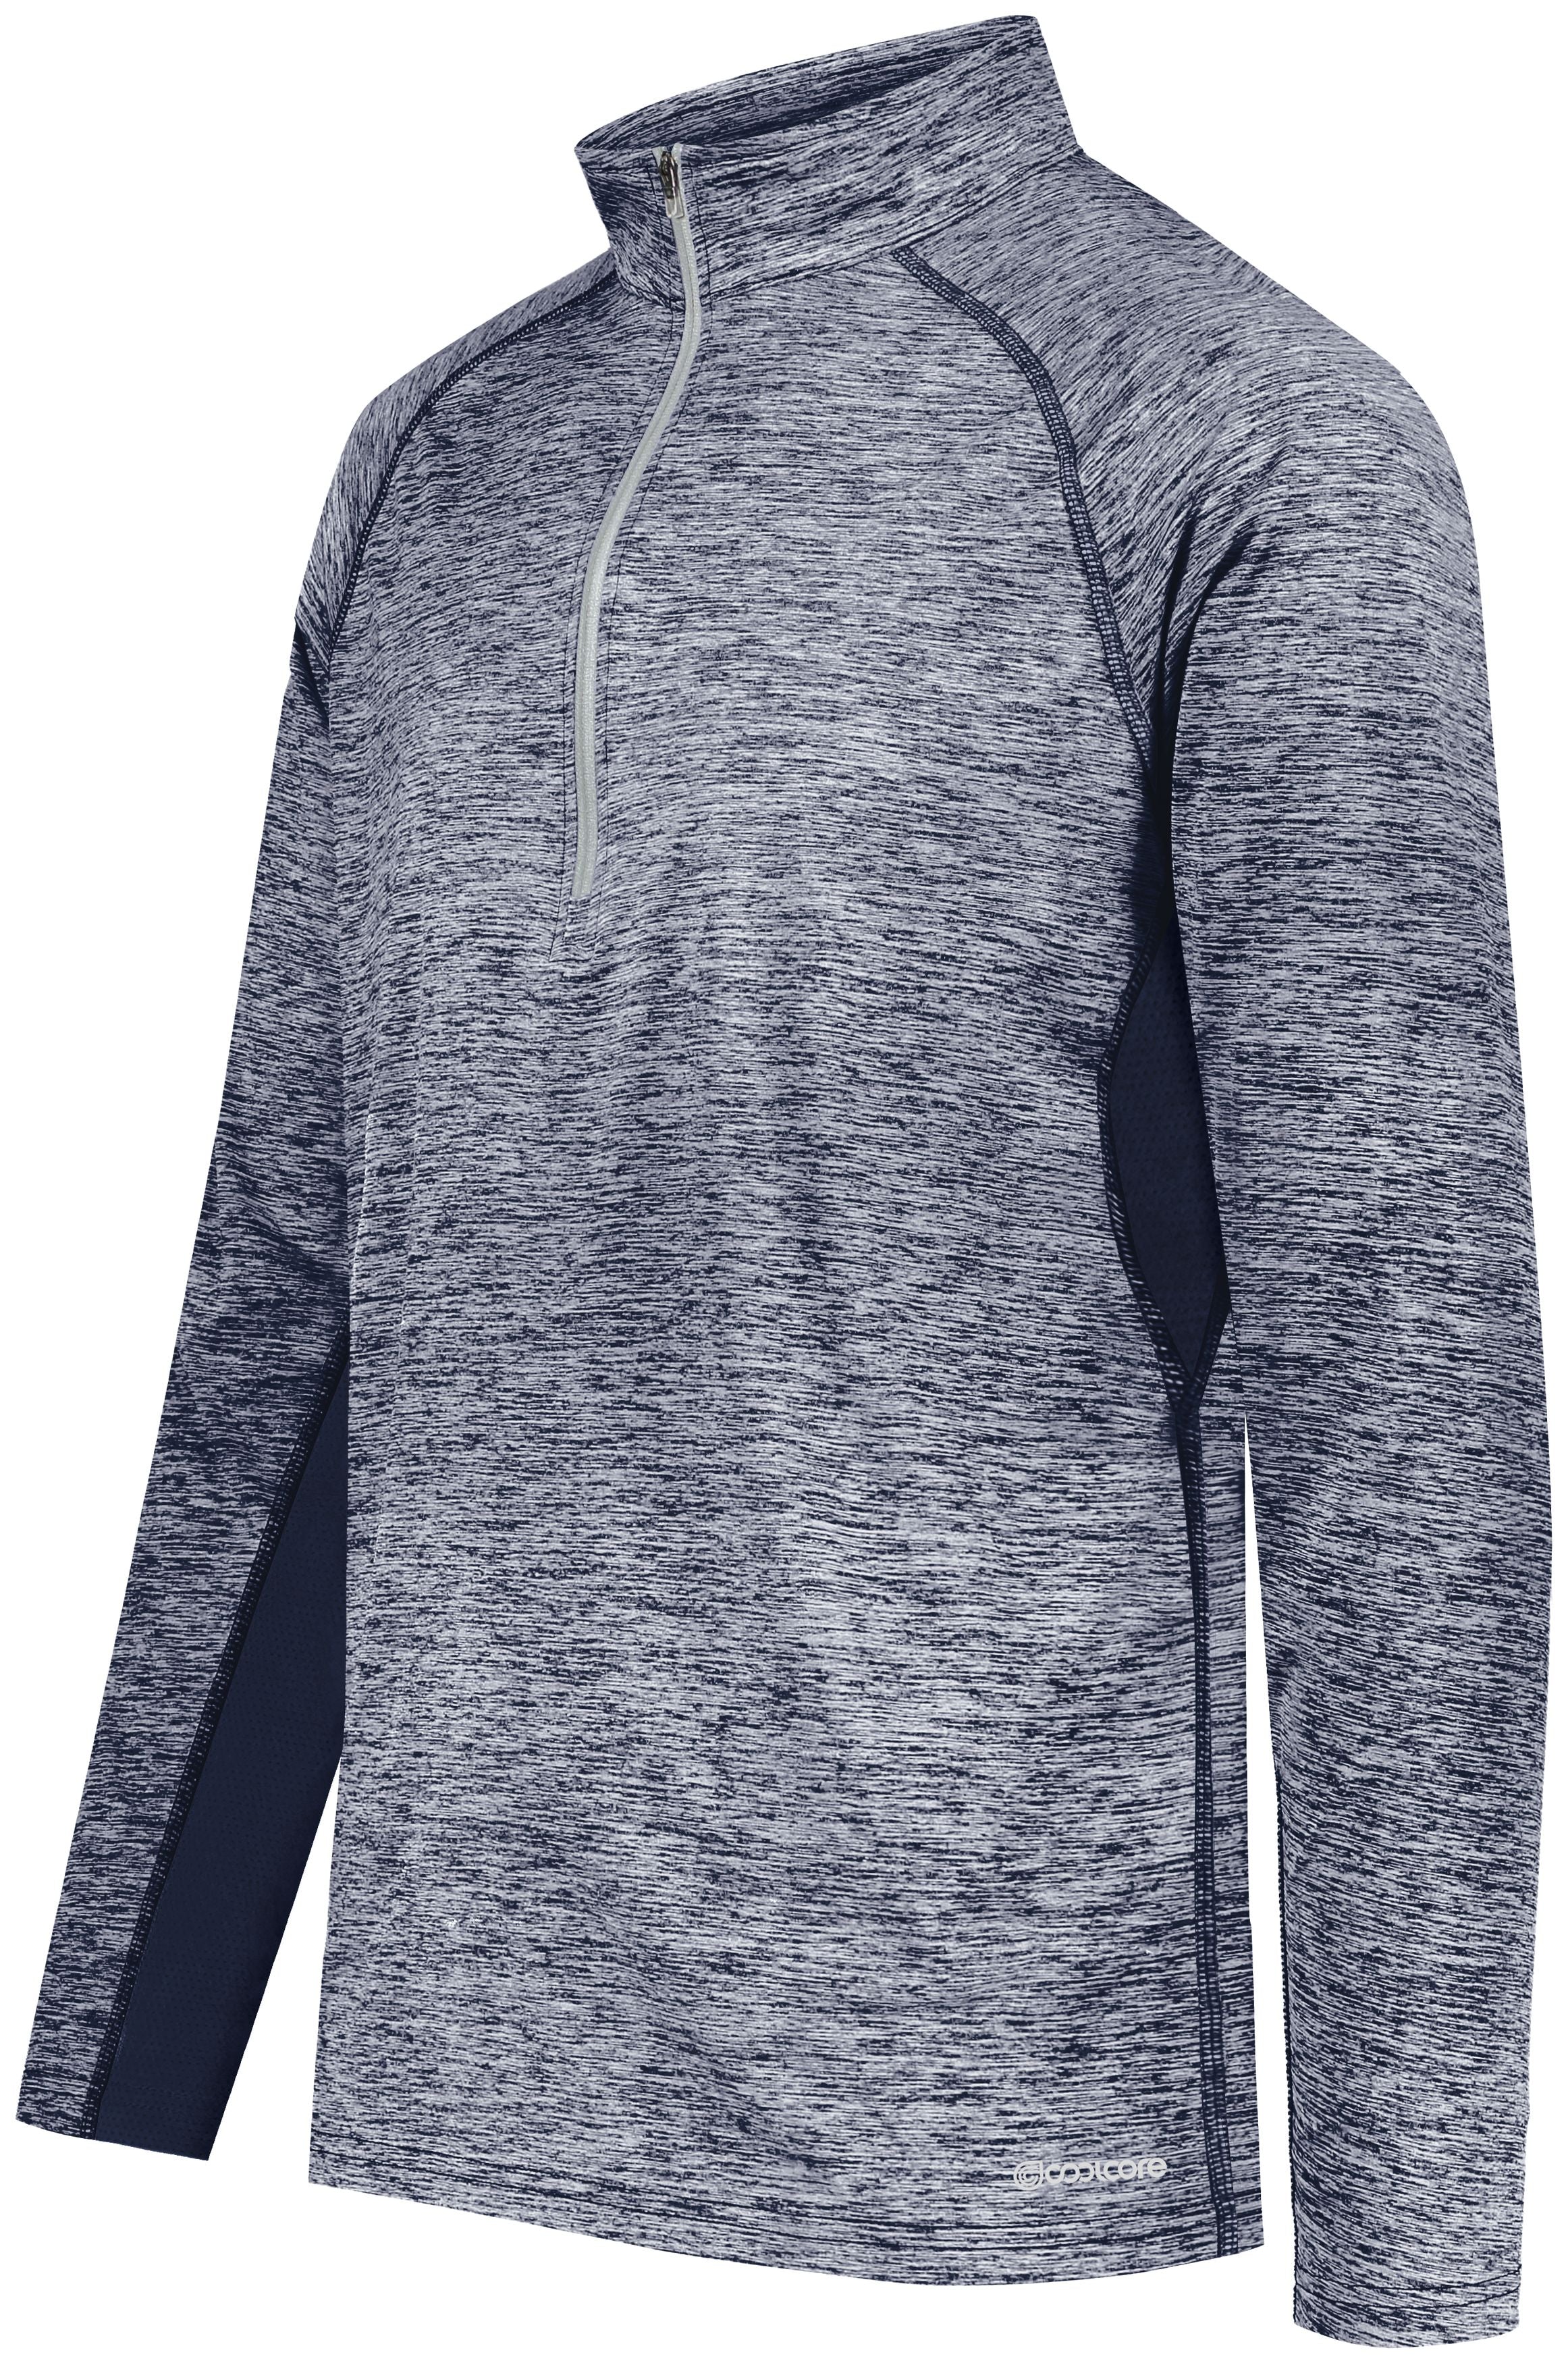 Youth Electrify Coolcore?? 1/2 Zip Pullover 222674